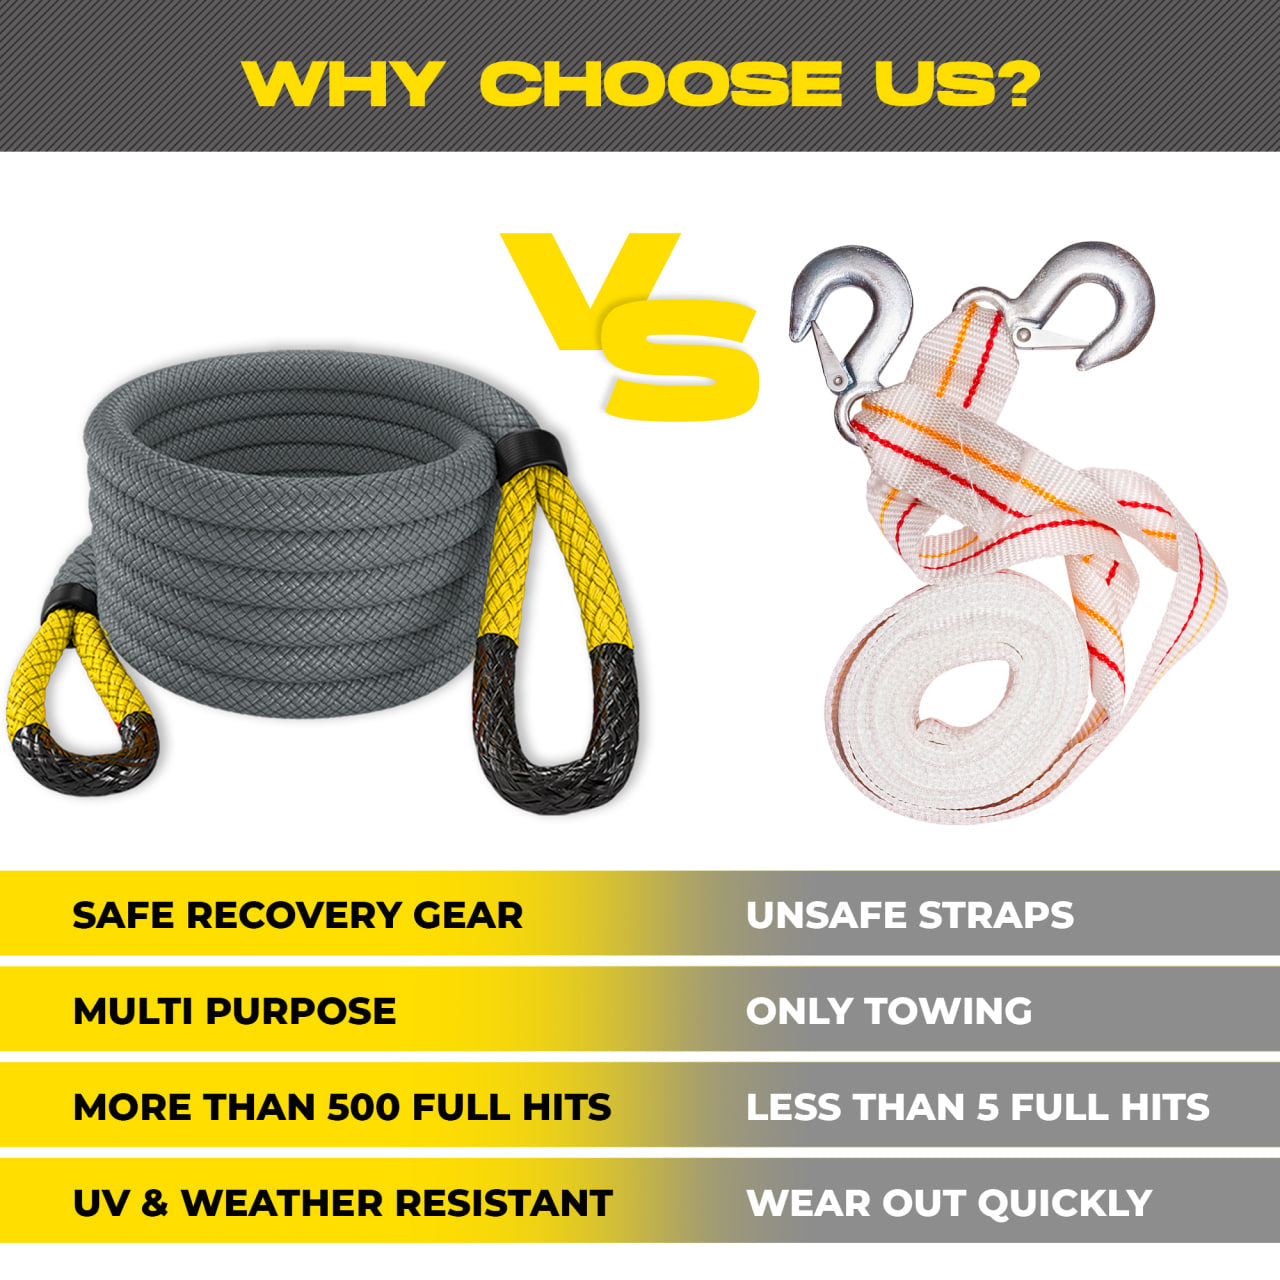 Miolle Tow Strap 2”x20’- 20990 lbs MBS (Lab Tested) Recovery Strap Kit Includes: Tow Rope, 2 D-Ring Shackles 5/8 MBS- 28640LBS, Storage Case